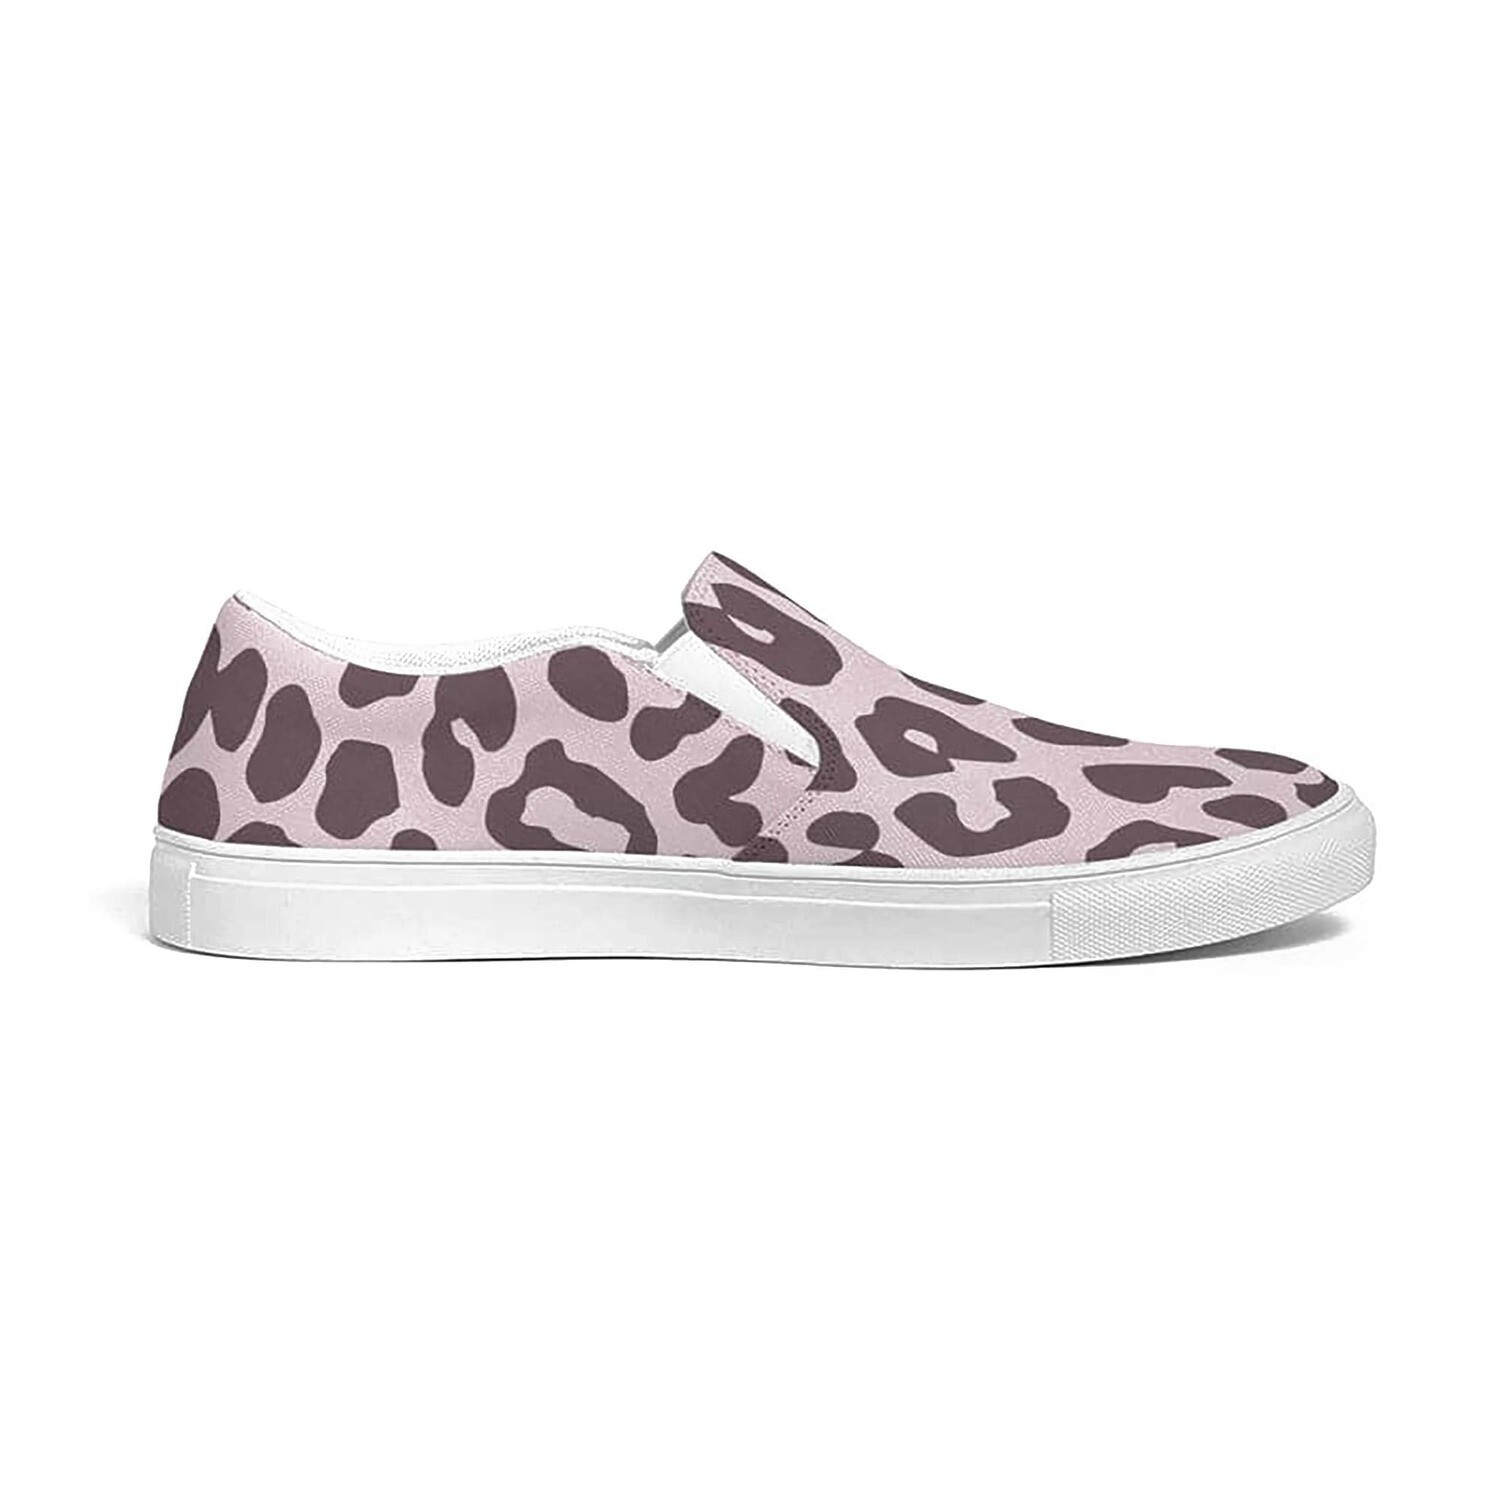 Uniquely You Womens Sneakers - Canvas Slip On Shoes, Pink Leopard Print